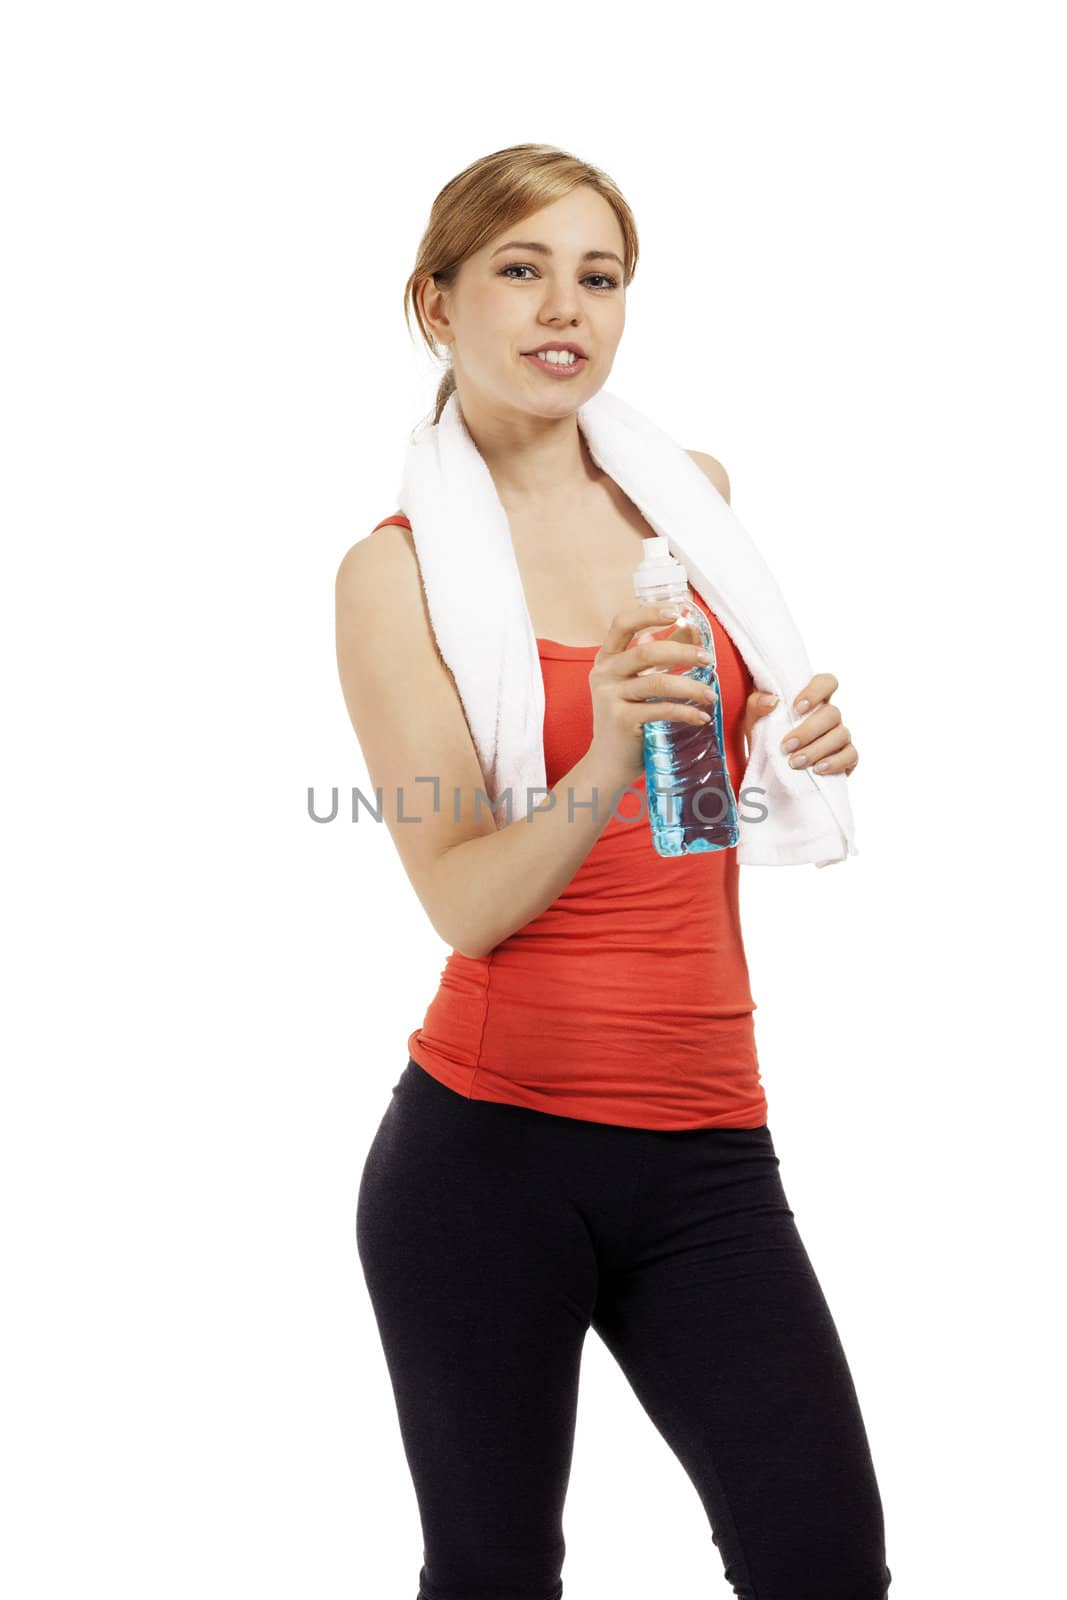 young sporty fitness woman with a bottle of water and a white towel on white background